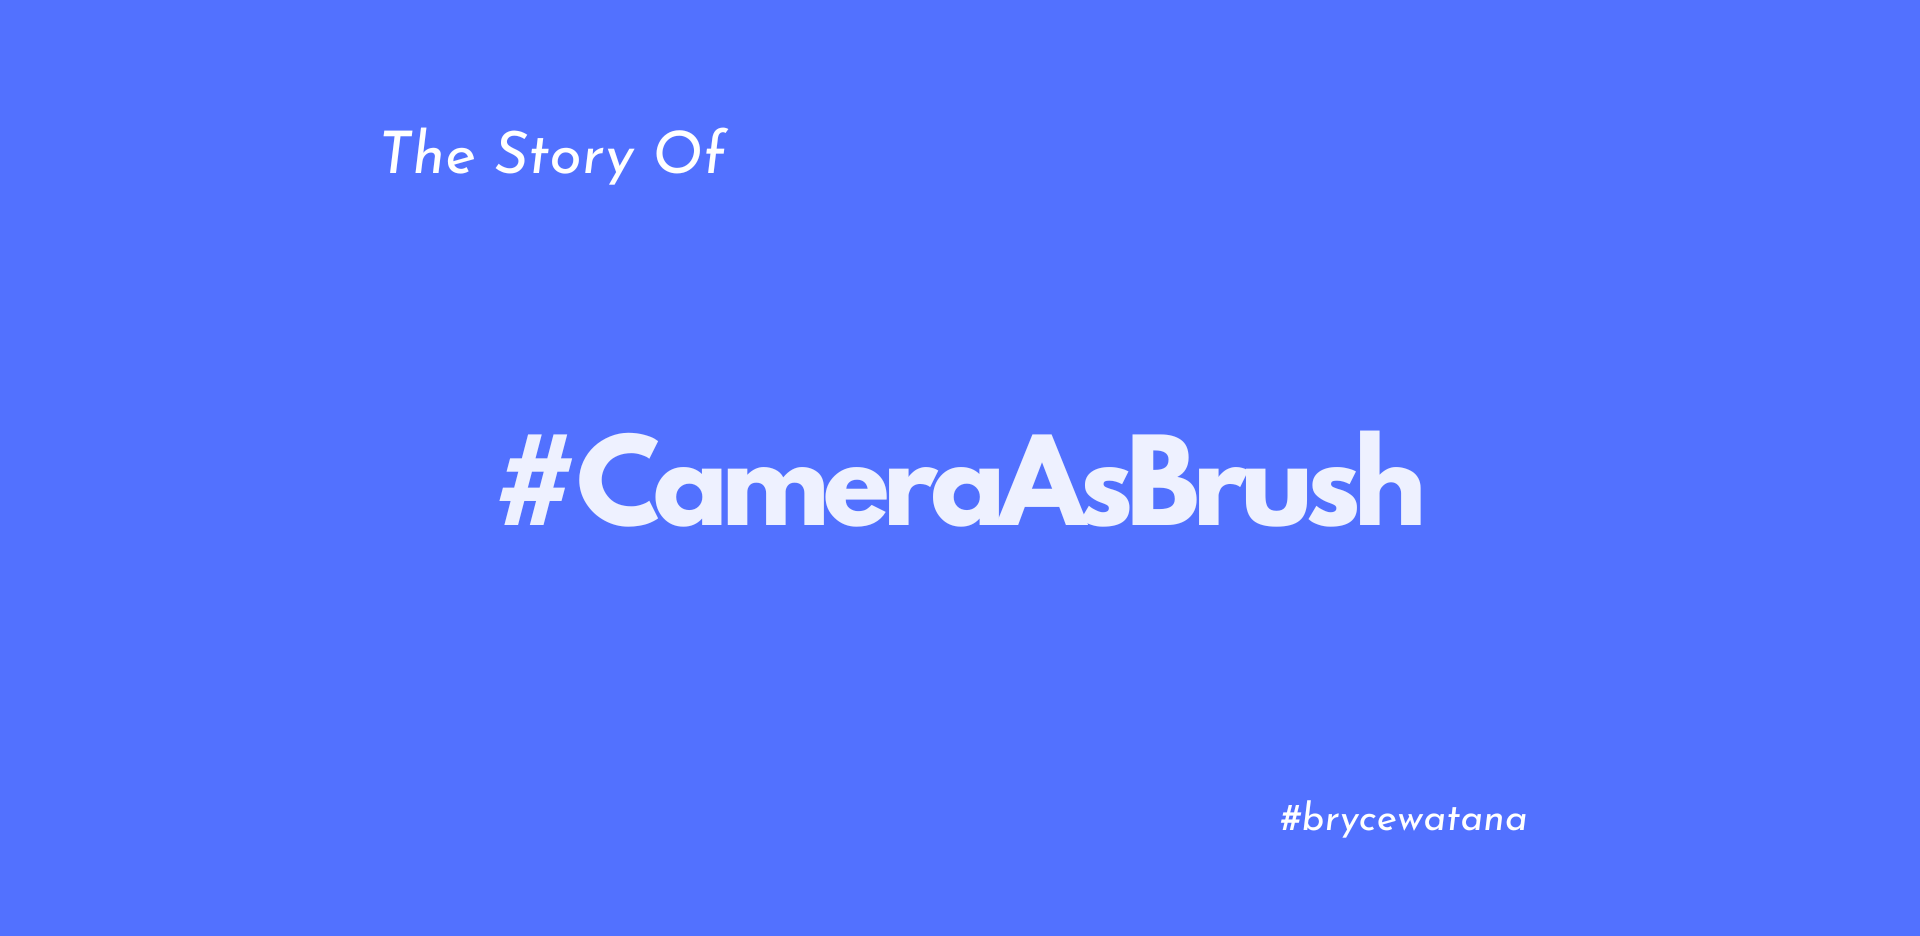 The Importance of Hashtags: My Use of #CameraAsBrush